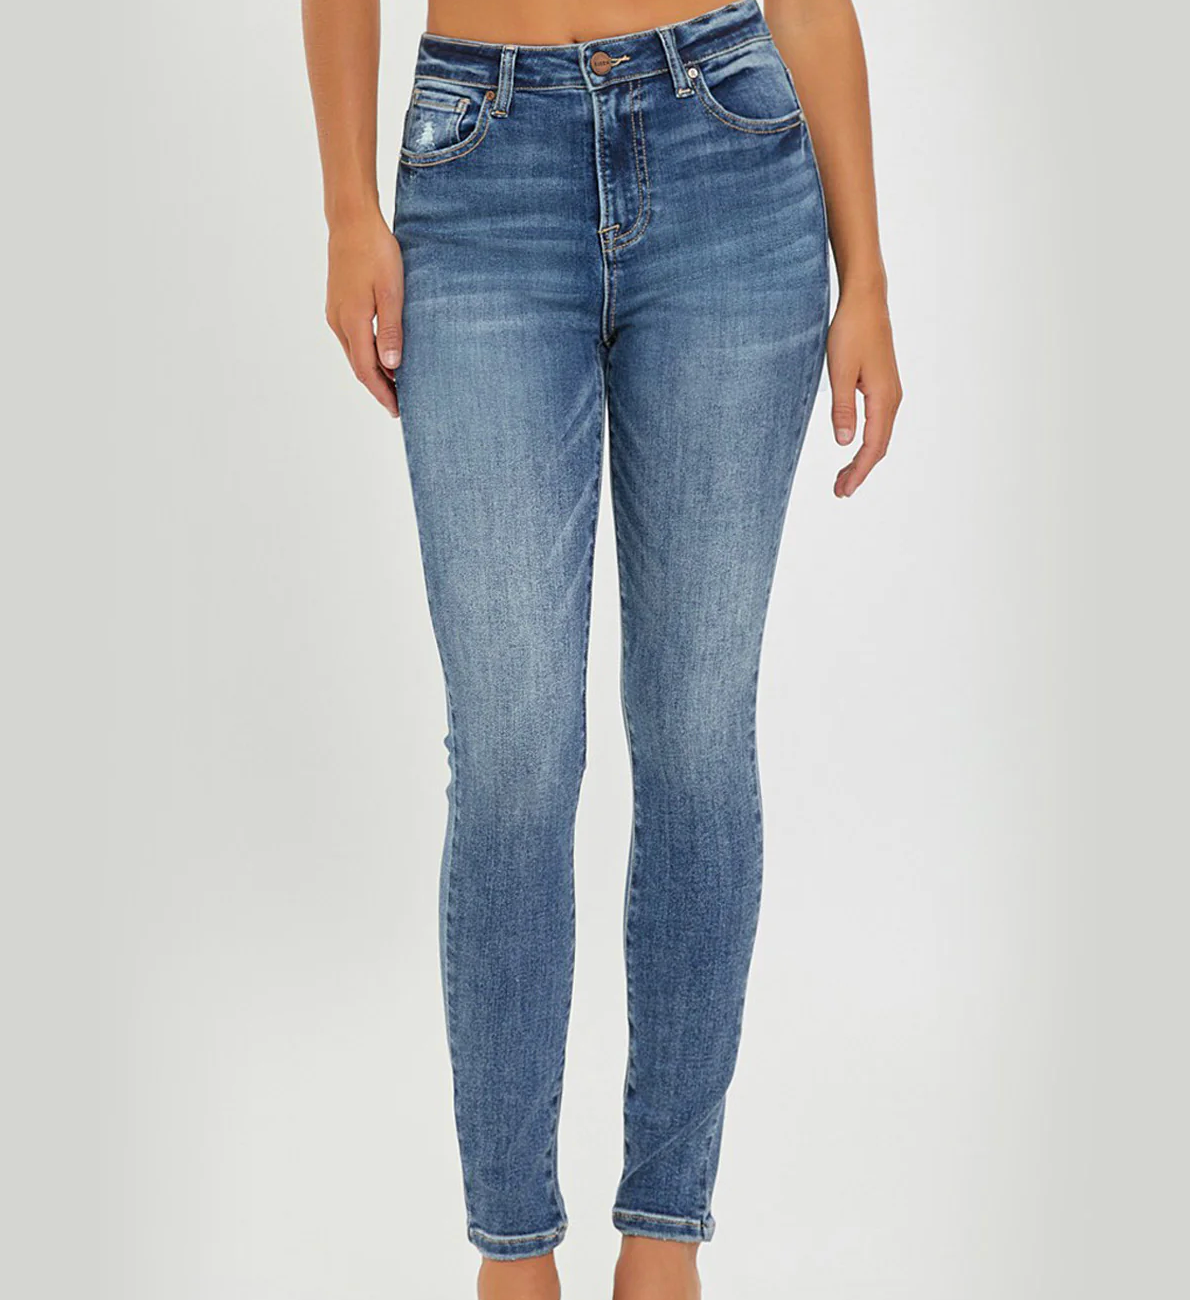 RISEN Mid-Rise Ankle Skinny Jeans in Dark - The Street Boutique 